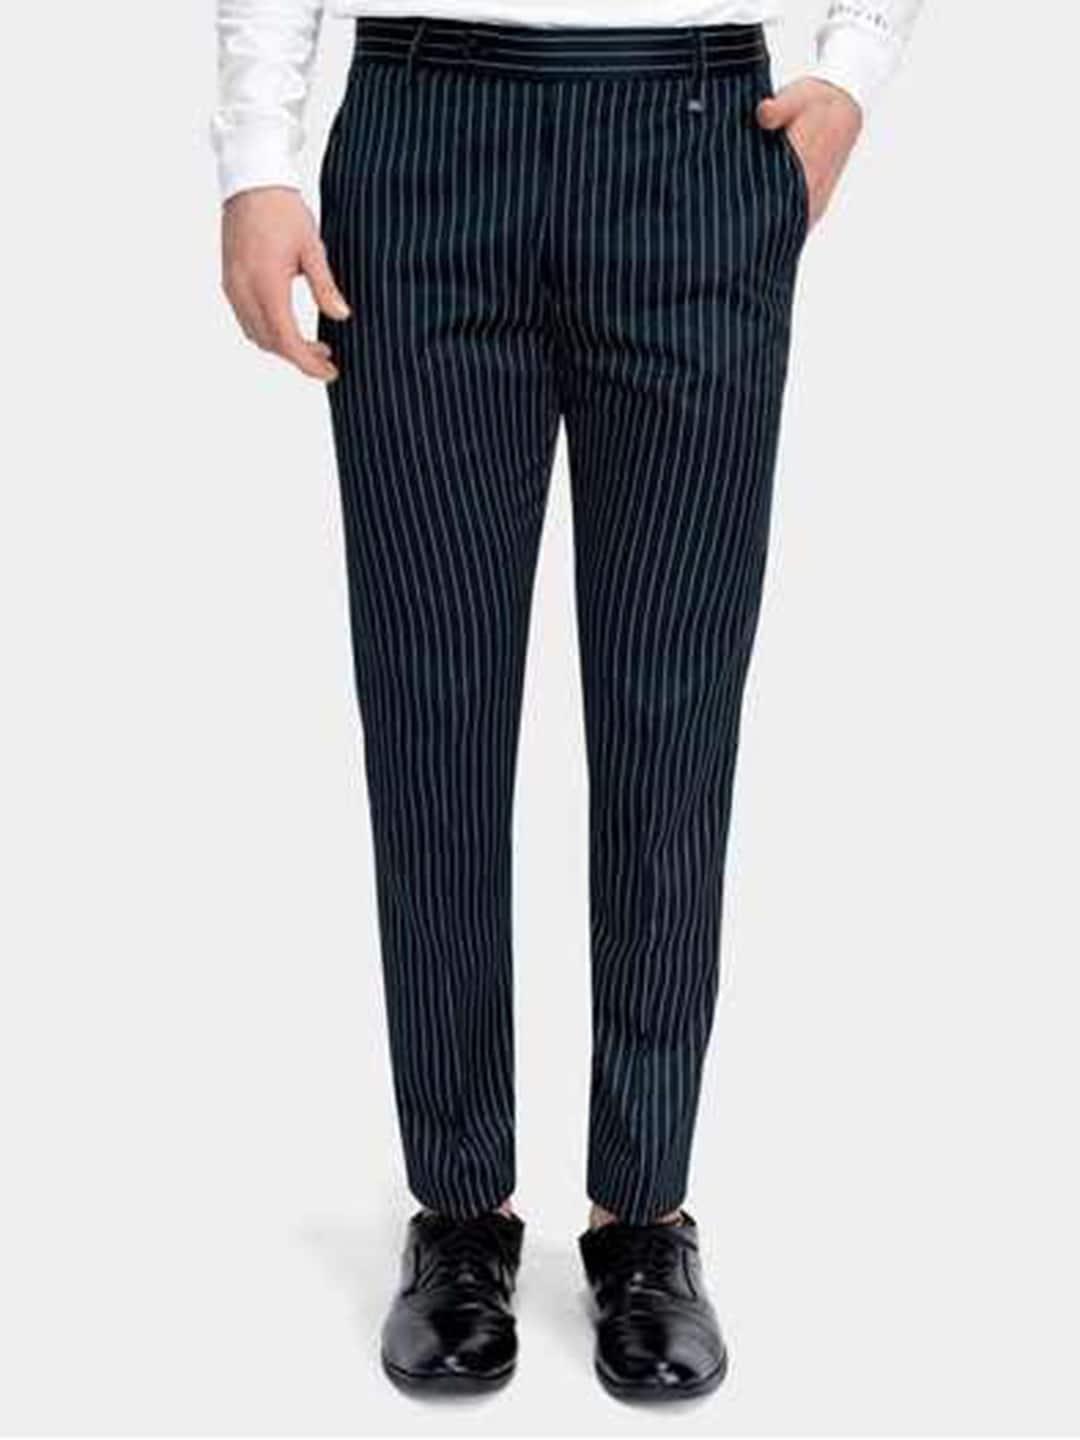 french-crown-men-striped-relaxed-wrinkle-free-chambray-chinos-trousers